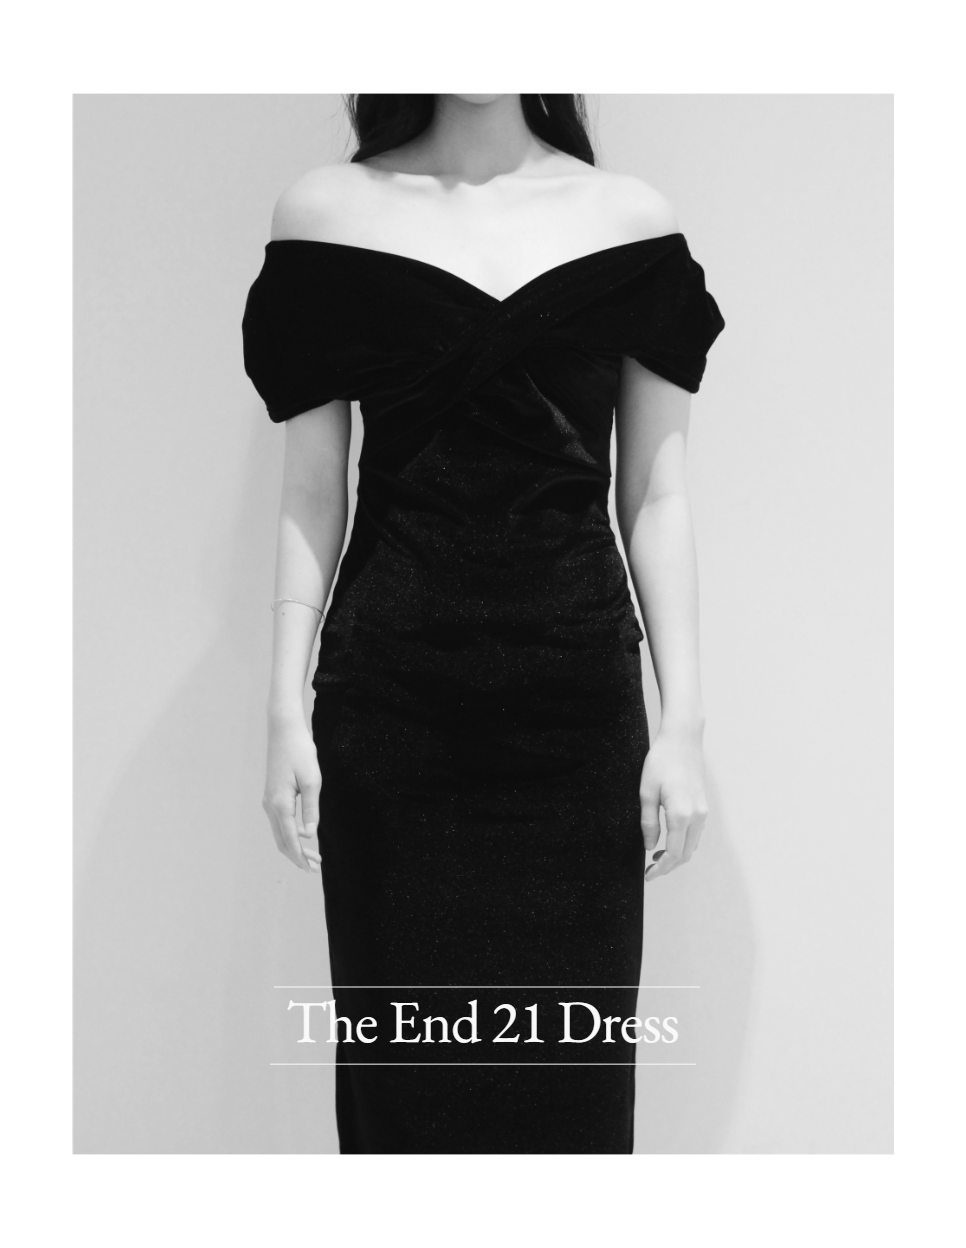 The End 21 Dress